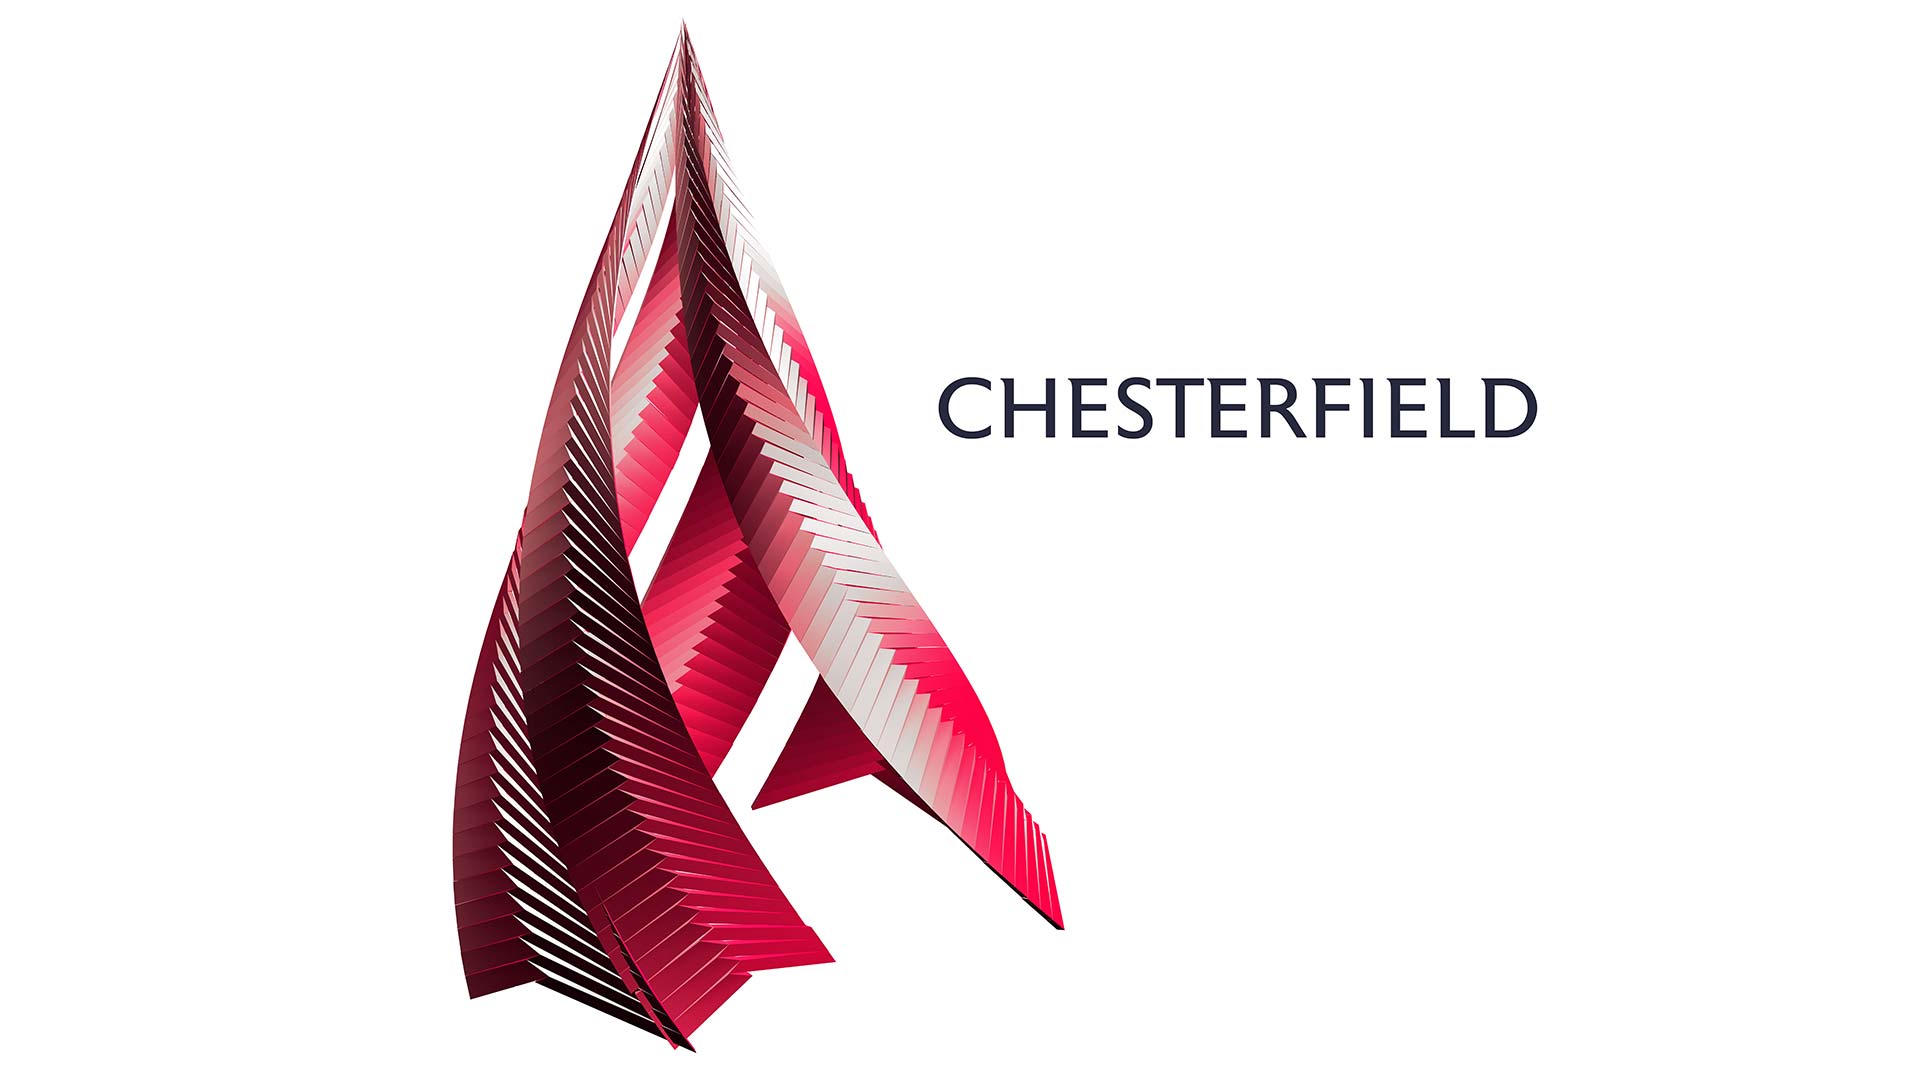 Peter Anderson Studio Chesterfield Place Branding 06